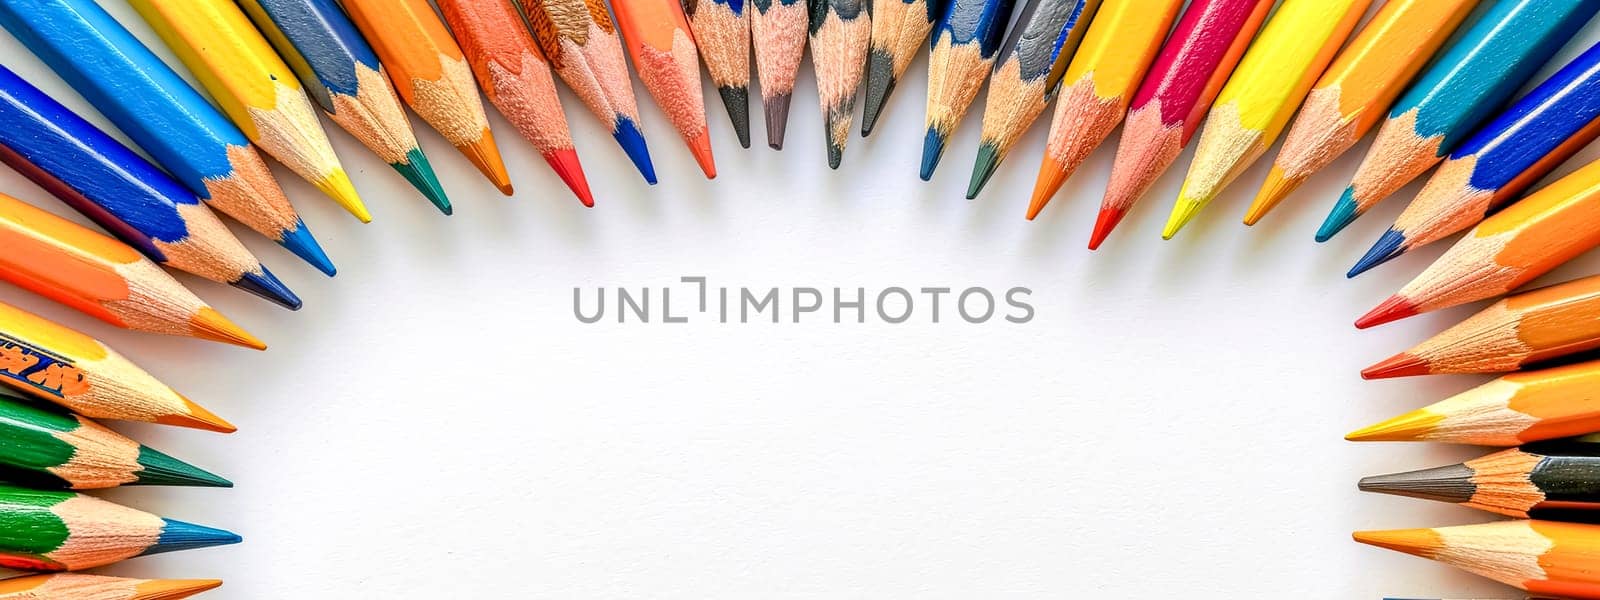 colored pencils neatly arranged in two converging lines against a white background, showcasing a spectrum of colors from blues and greens to yellows, oranges, and reds, copy space